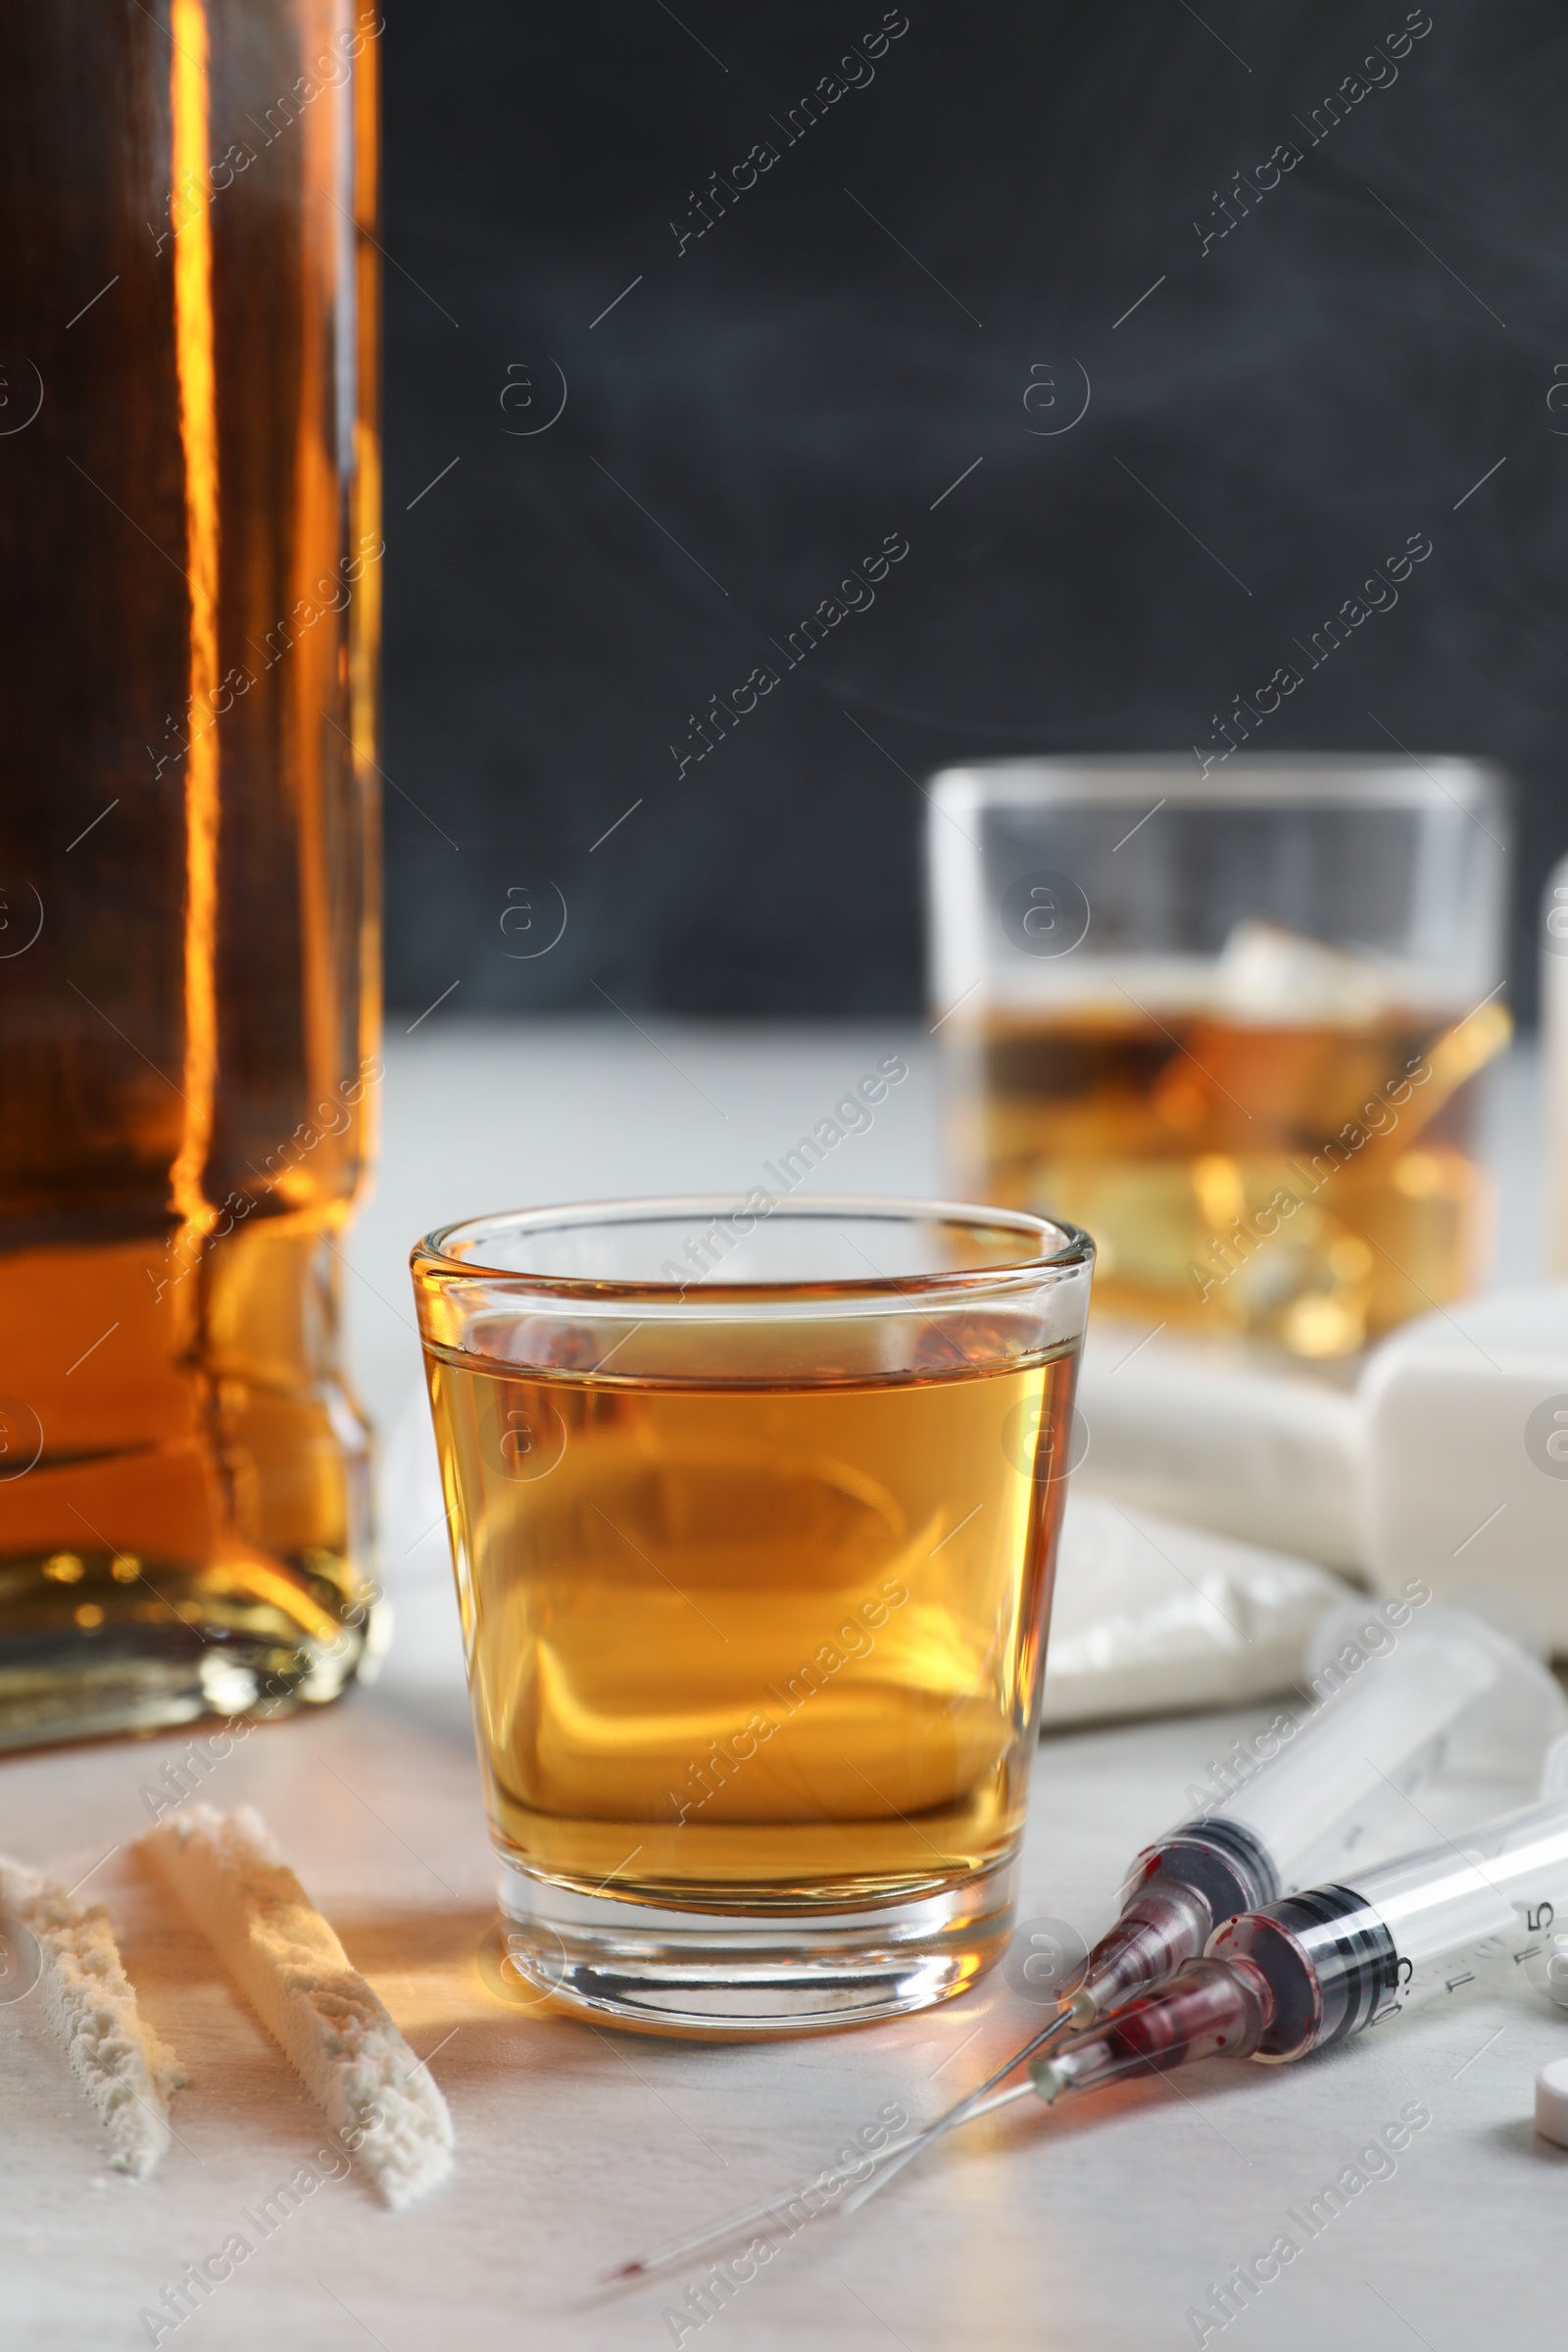 Photo of Alcohol and drug addiction. Whiskey in glass, syringes and cocaine on white table